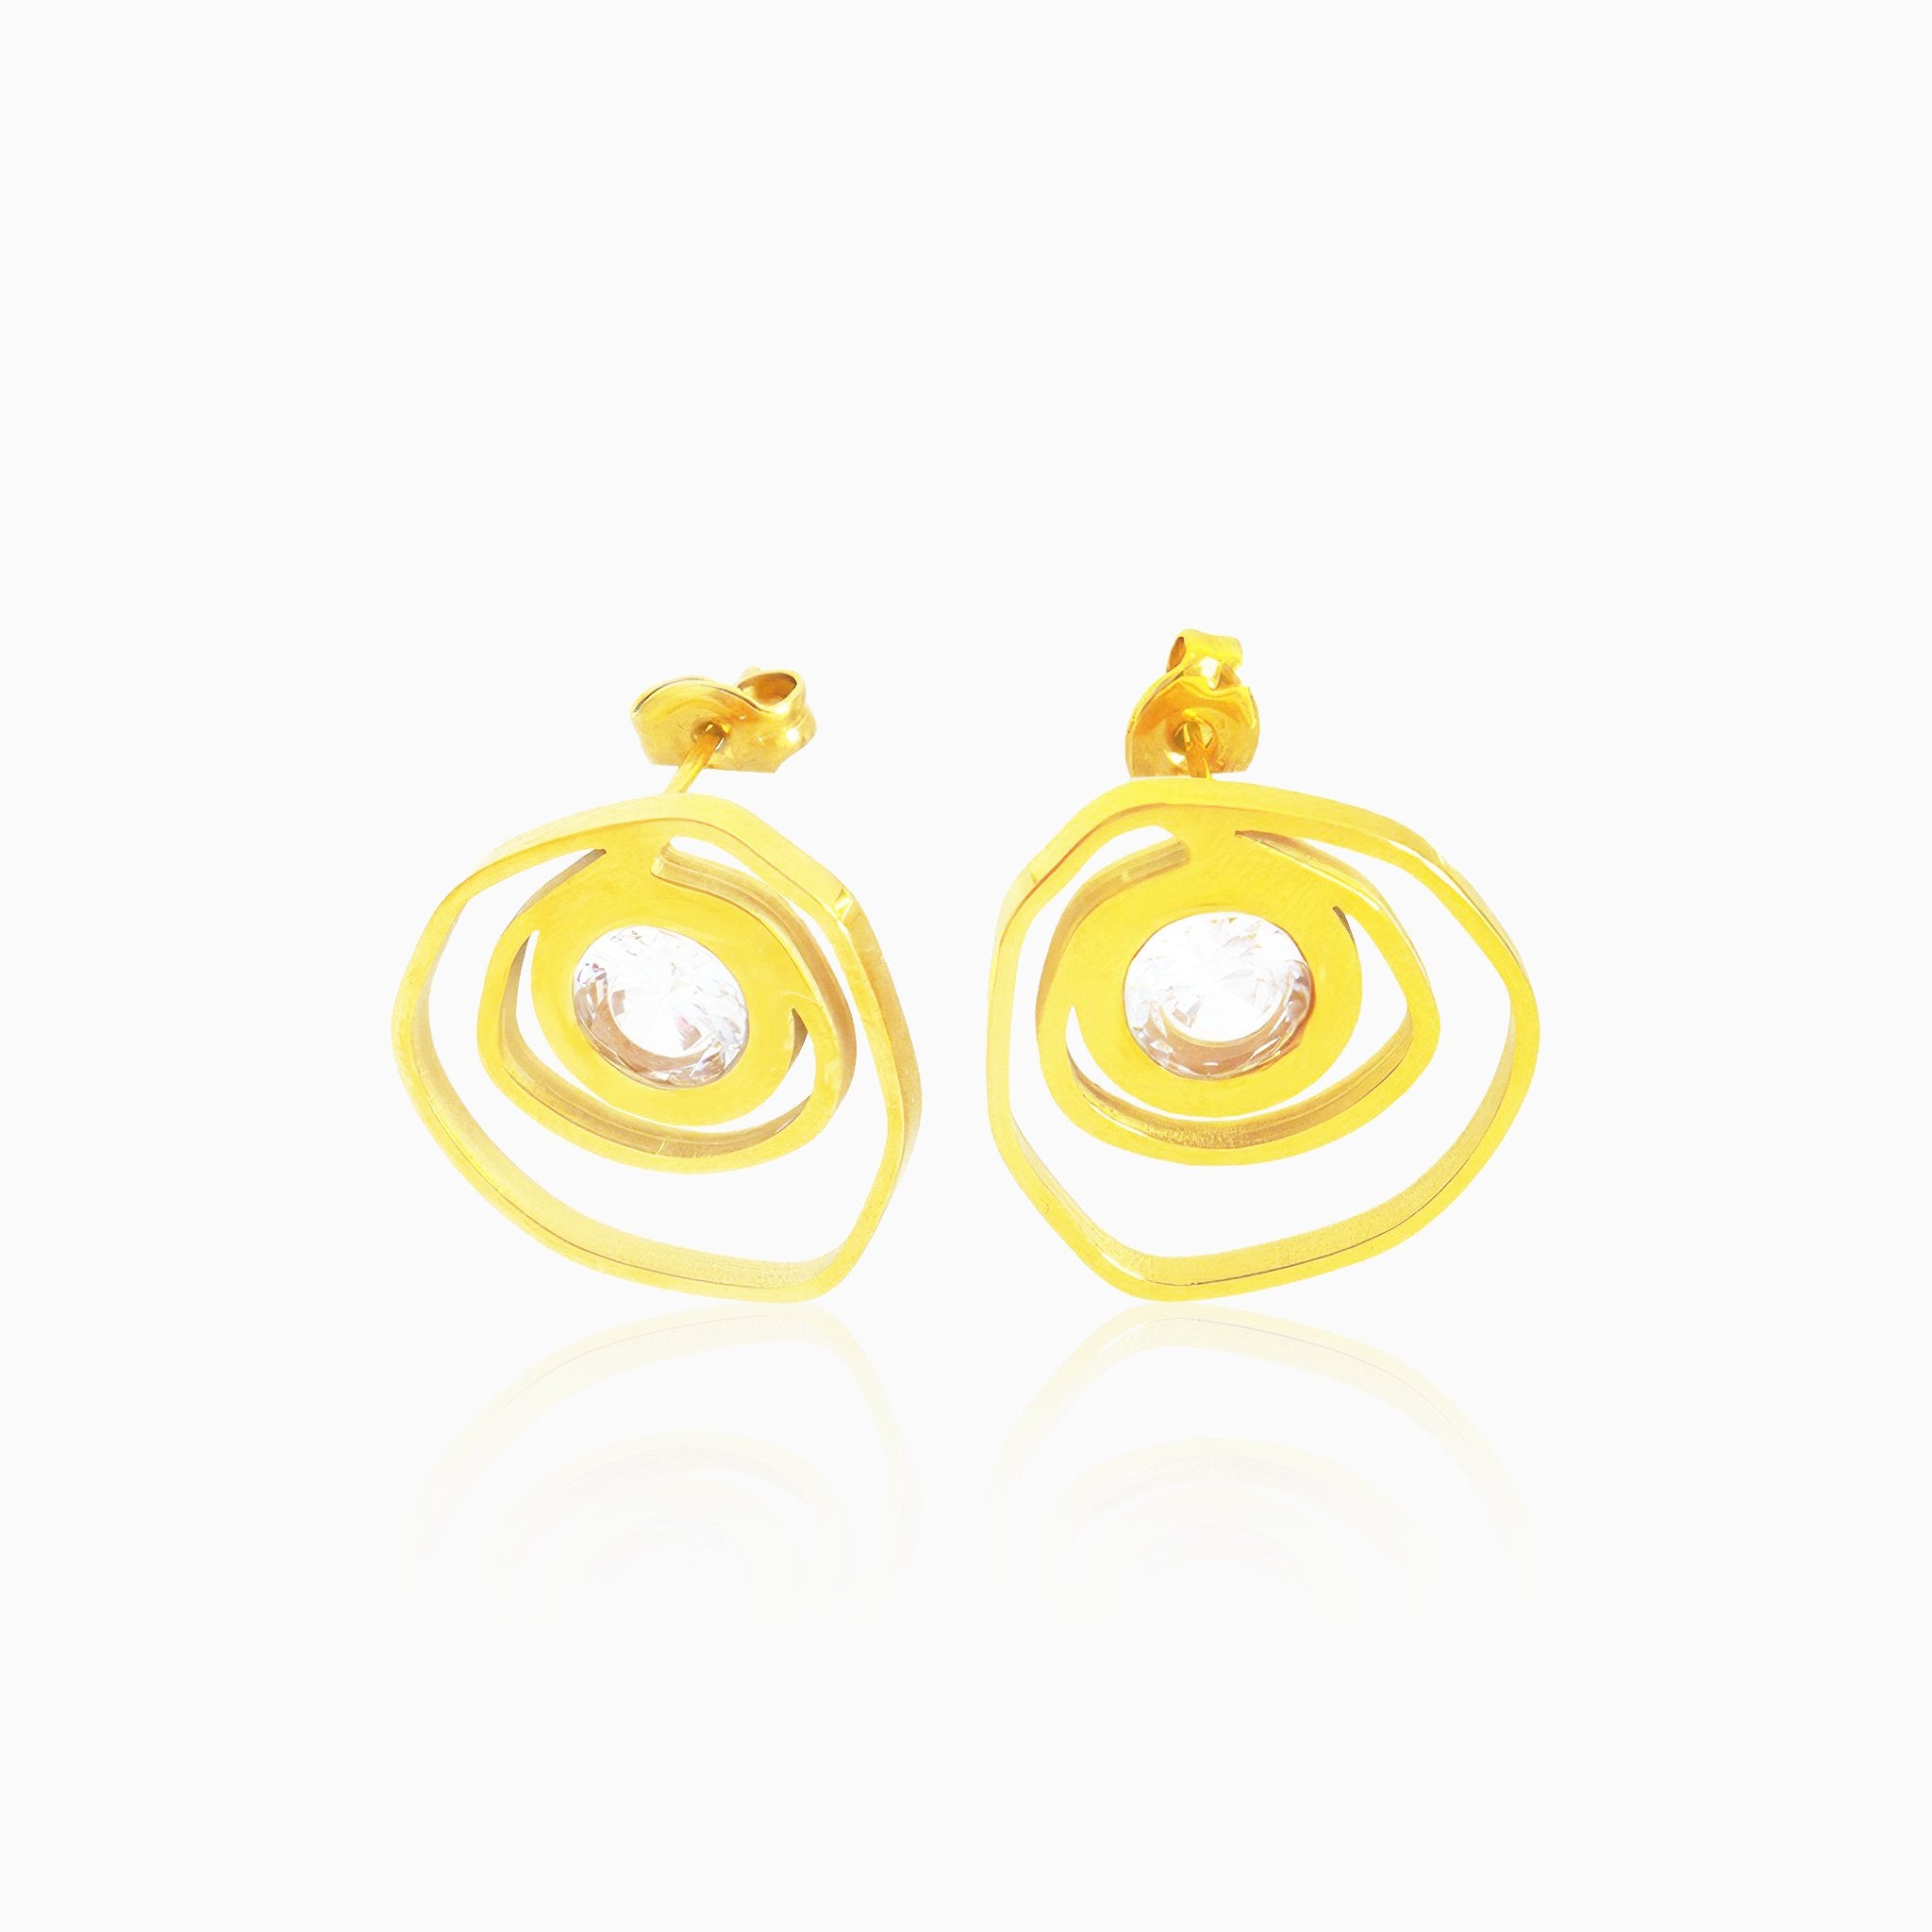 Irregular Hollow Earrings - Nobbier - Earring - 18K Gold And Titanium PVD Coated Jewelry